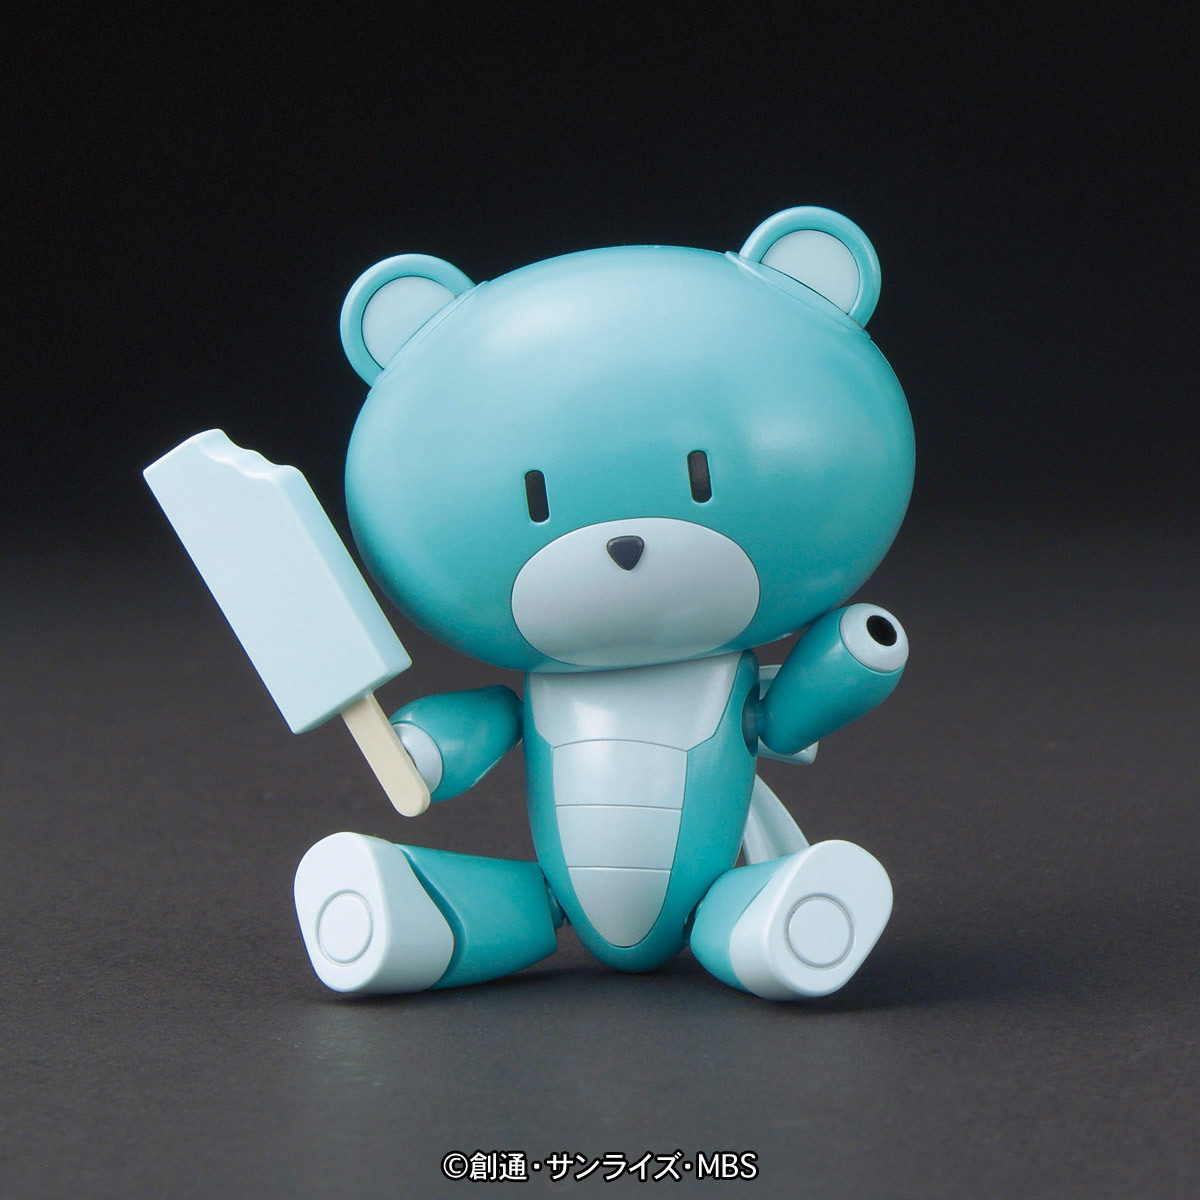 HGPG 1/144 Petitgguy Soda Pop Blue and Ice Candy - Release Info